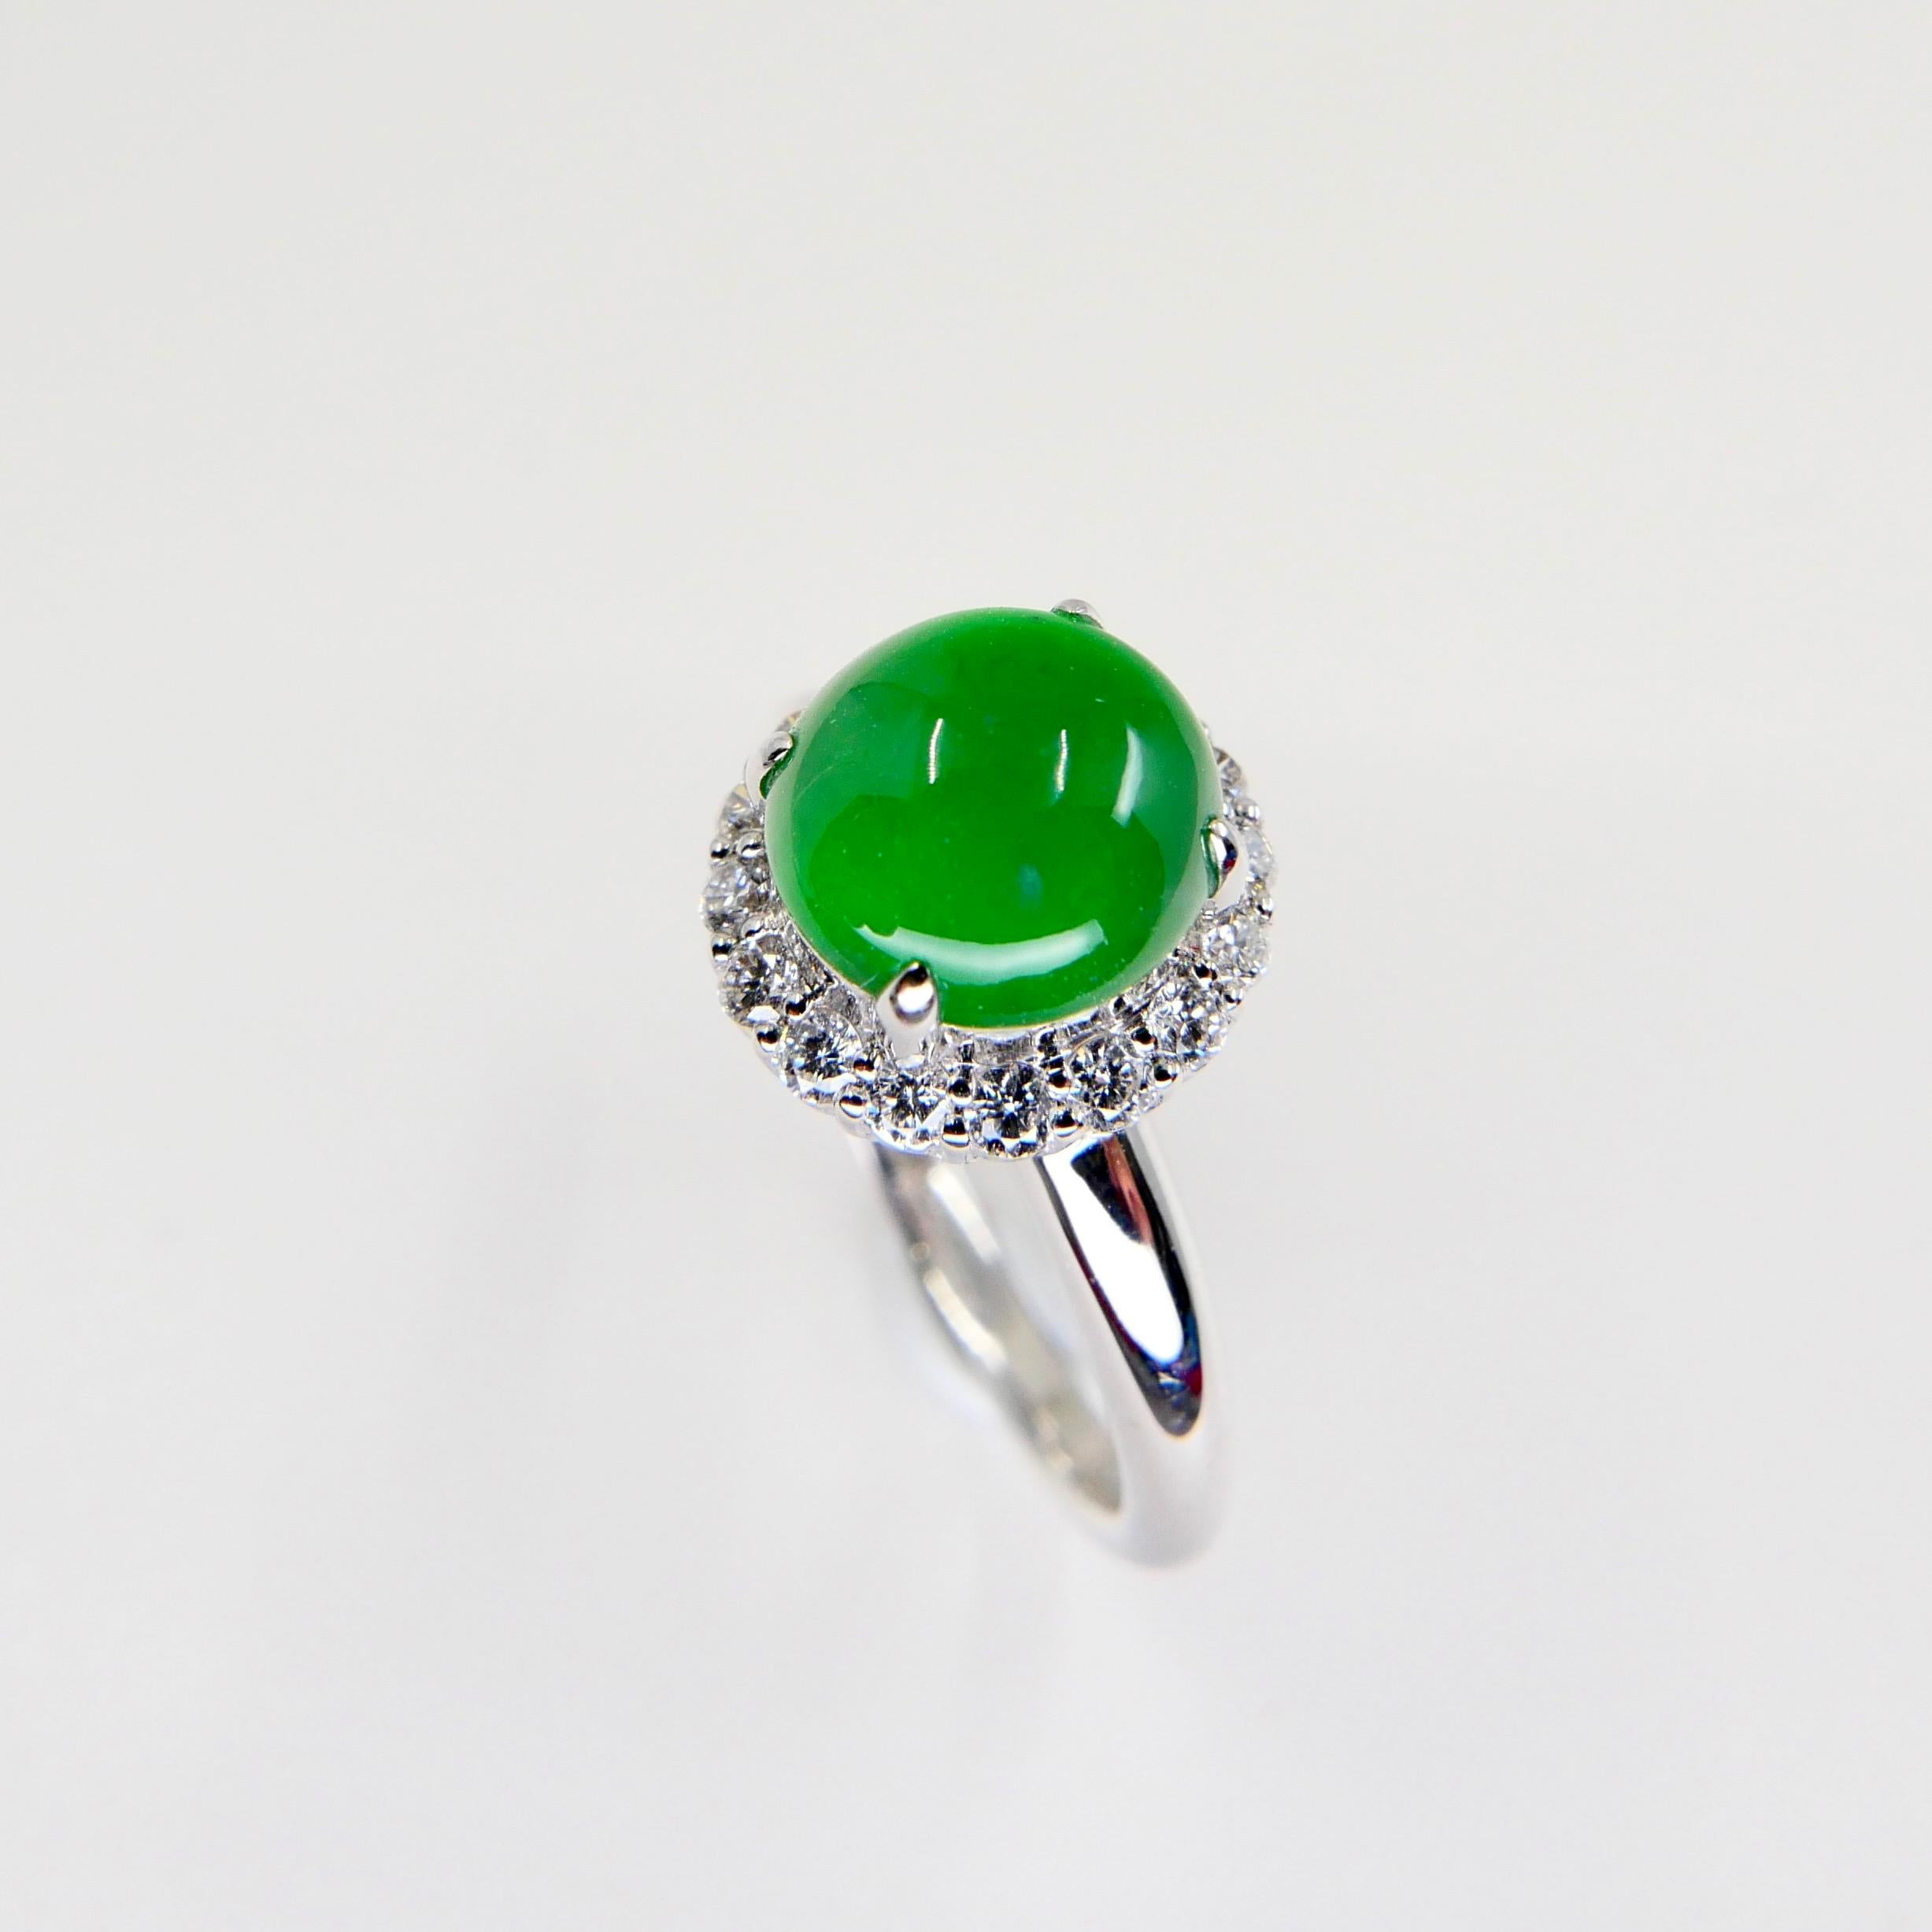 Certified Type A Icy Apple Green Jadeite Jade and Diamond Ring, Super Glow For Sale 3